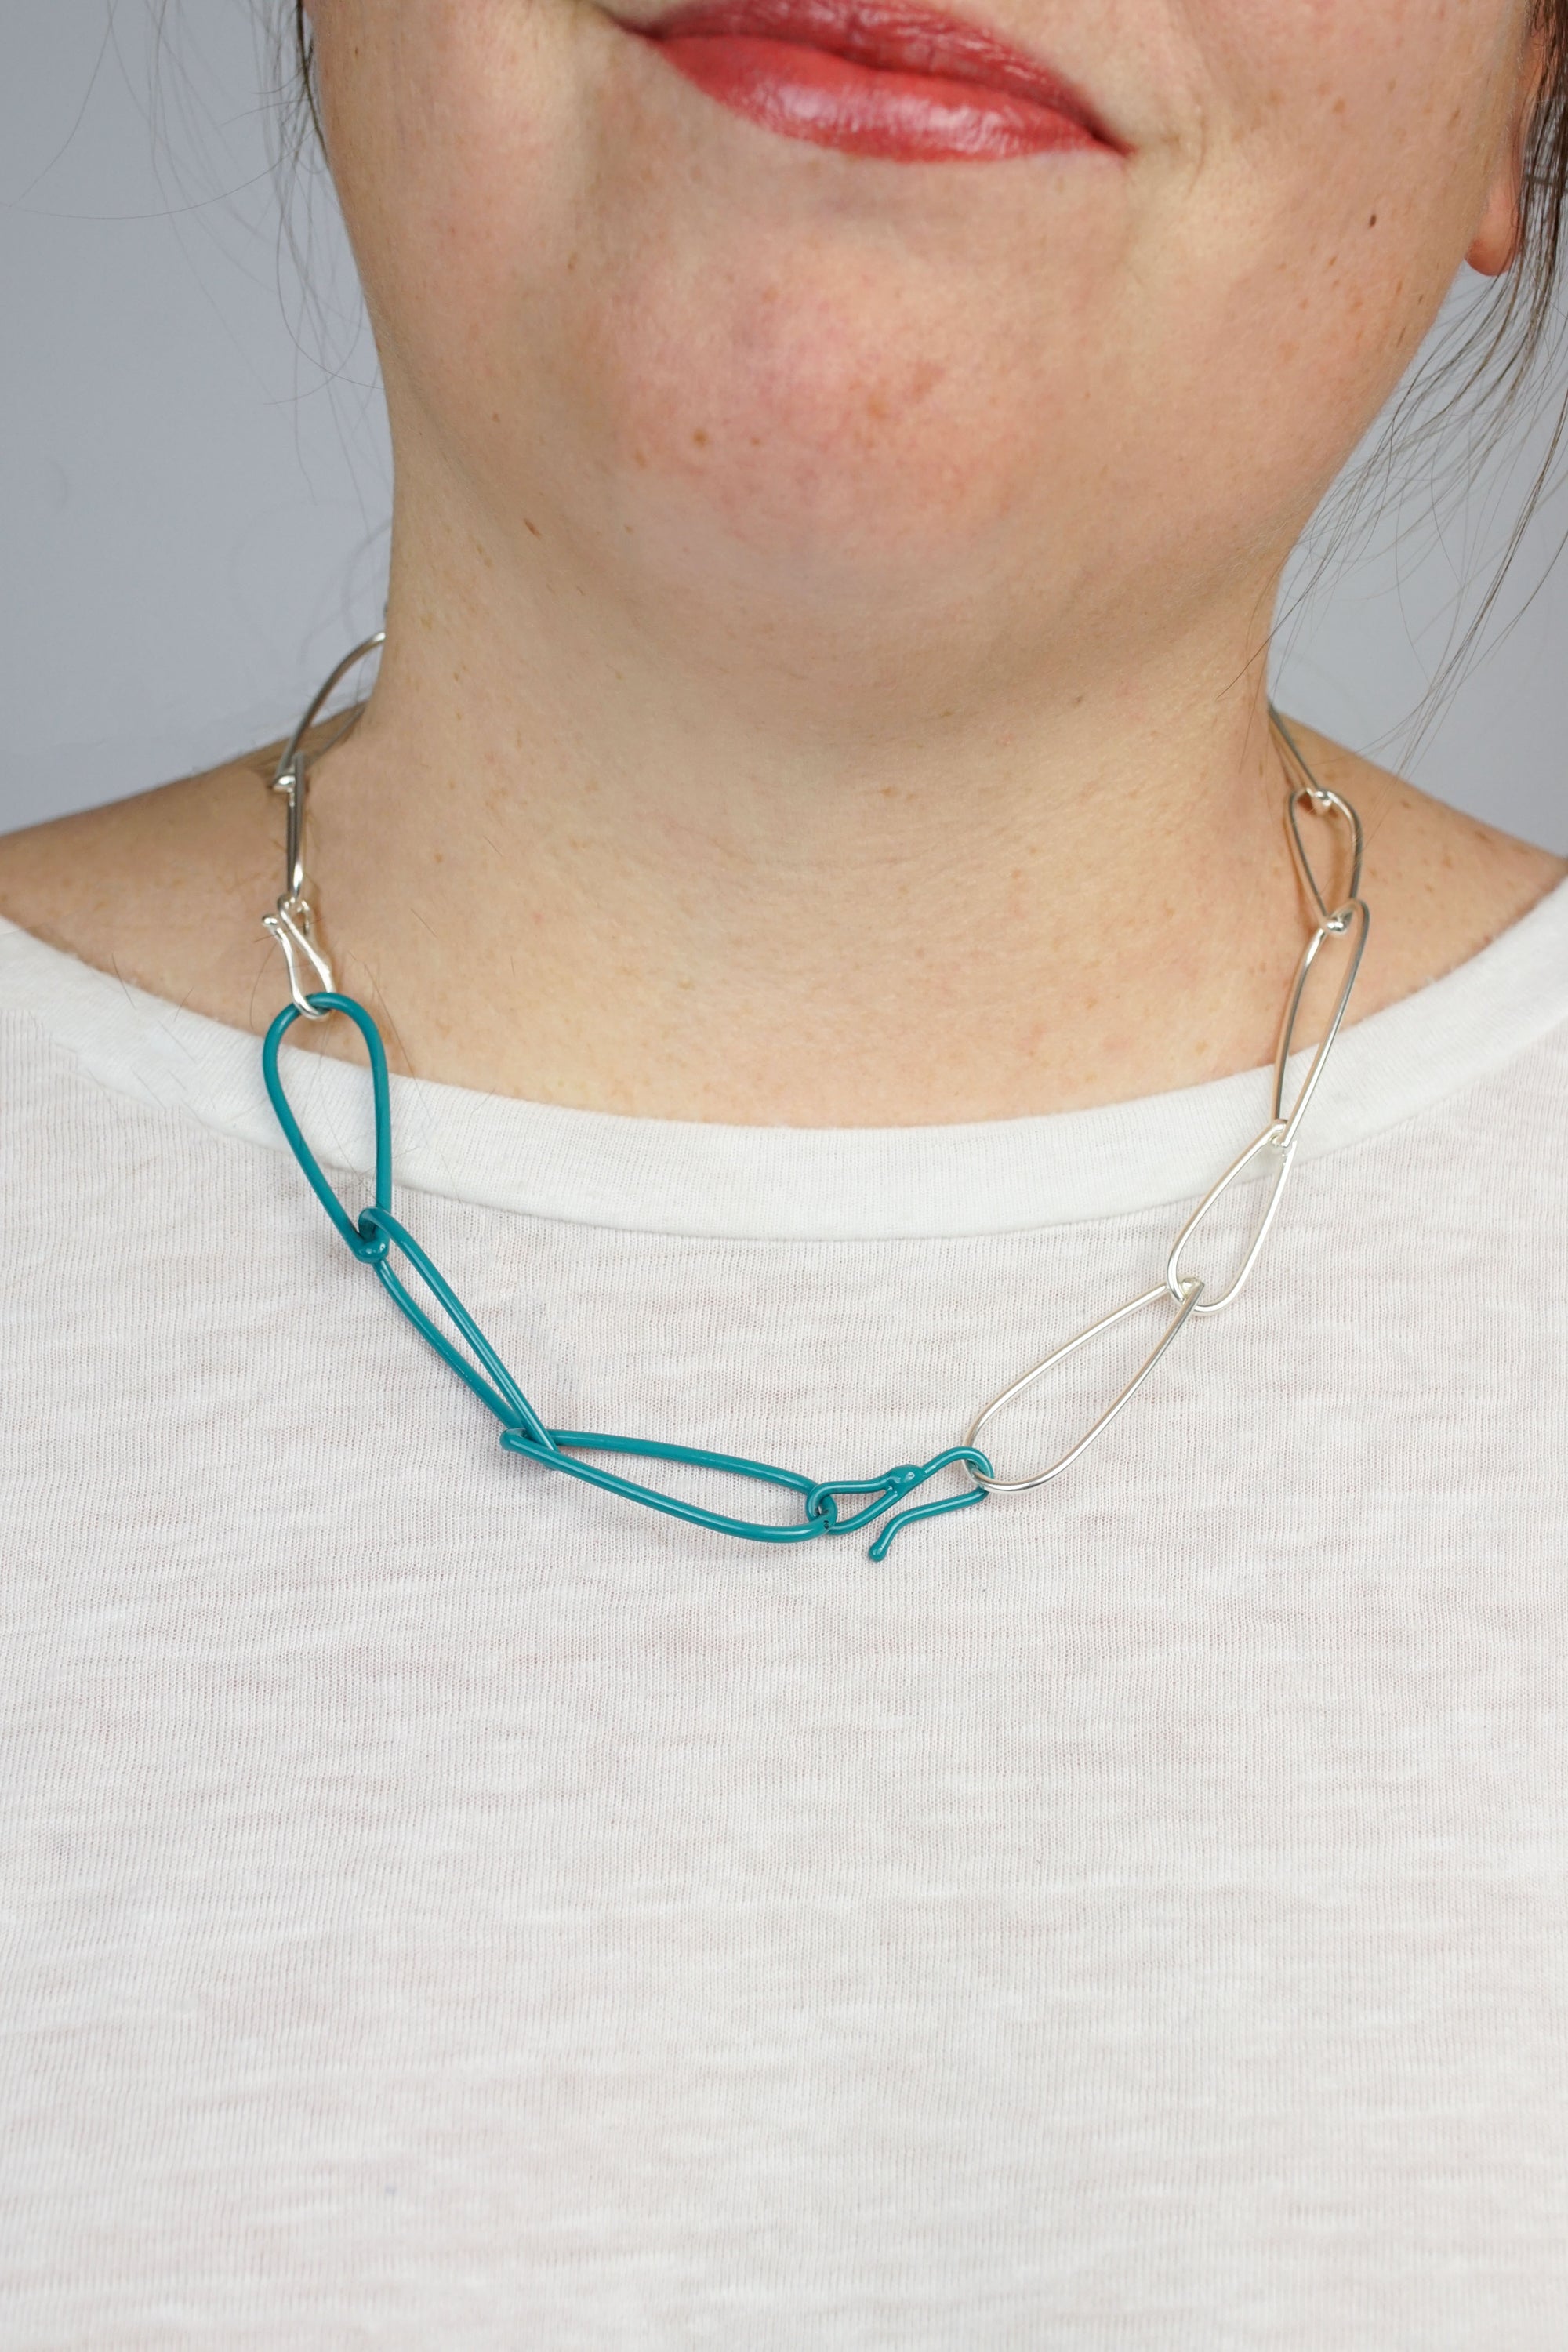 Modular Necklace in Silver and Bold Teal